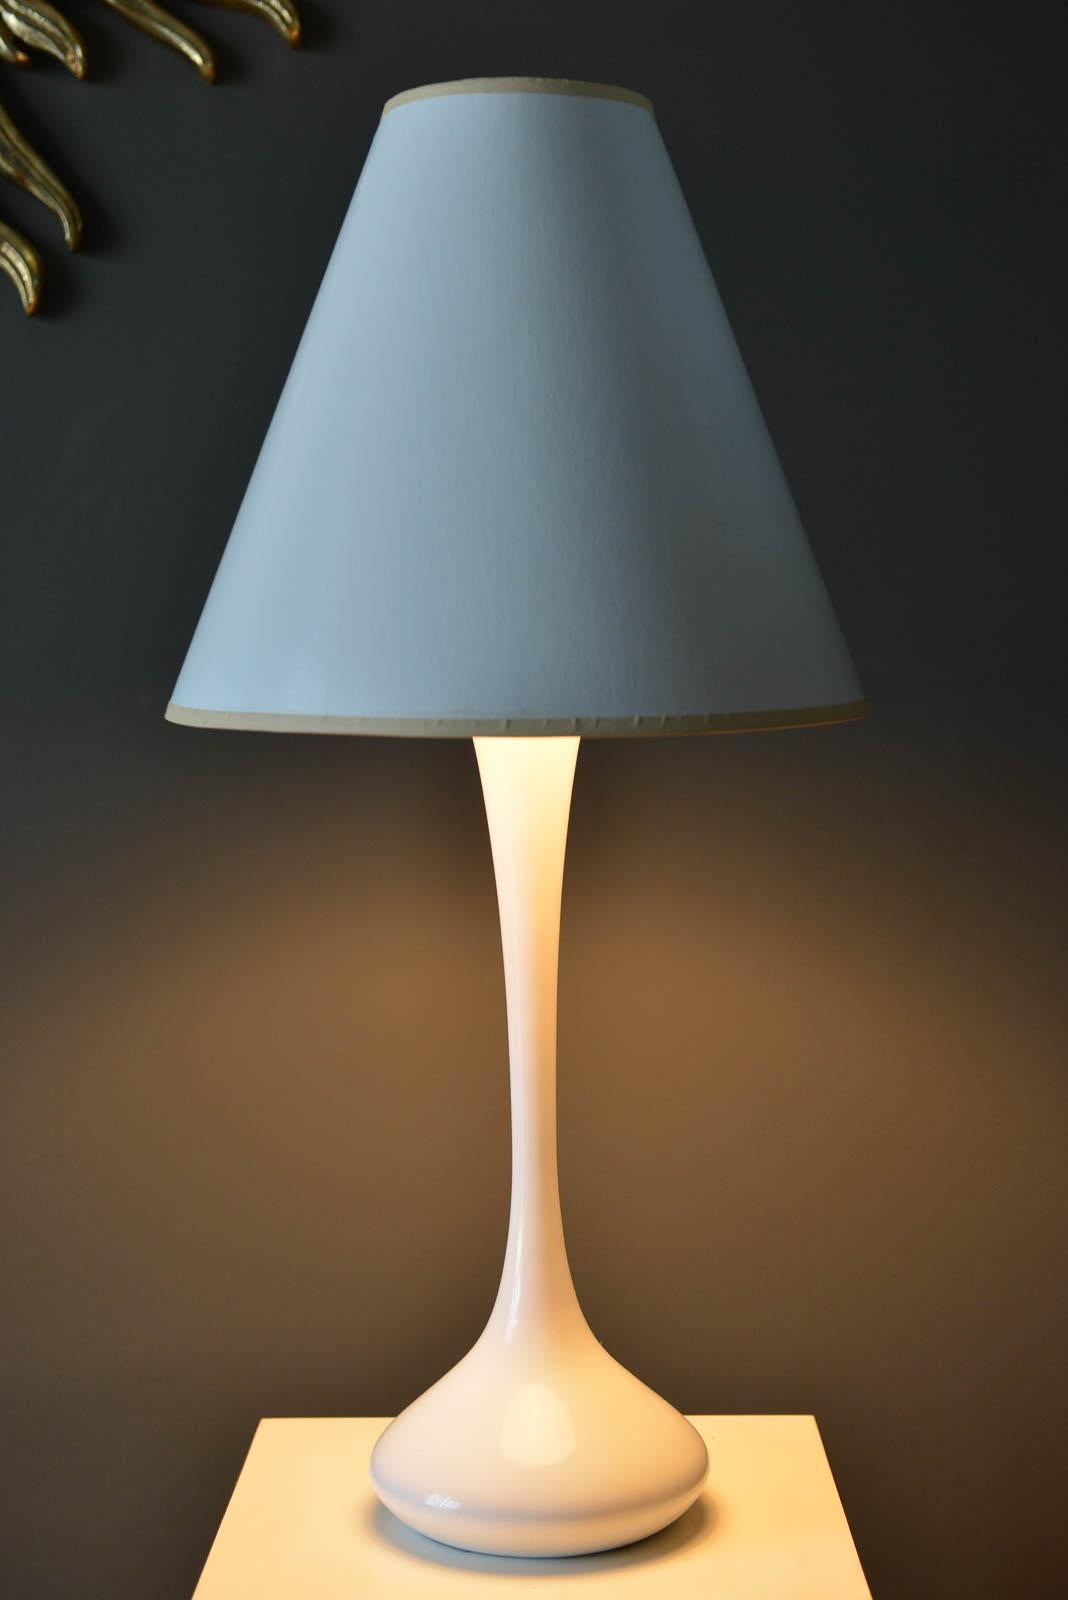 Laurel teardrop table lamp model H-929, circa 1977. Original metal teardrop table lamp, possibly attributions to Bill Curry. From 1977 Laurel Lamp Co. Catalog. Original shade and wiring in excellent condition. White enameled metal is excellent with